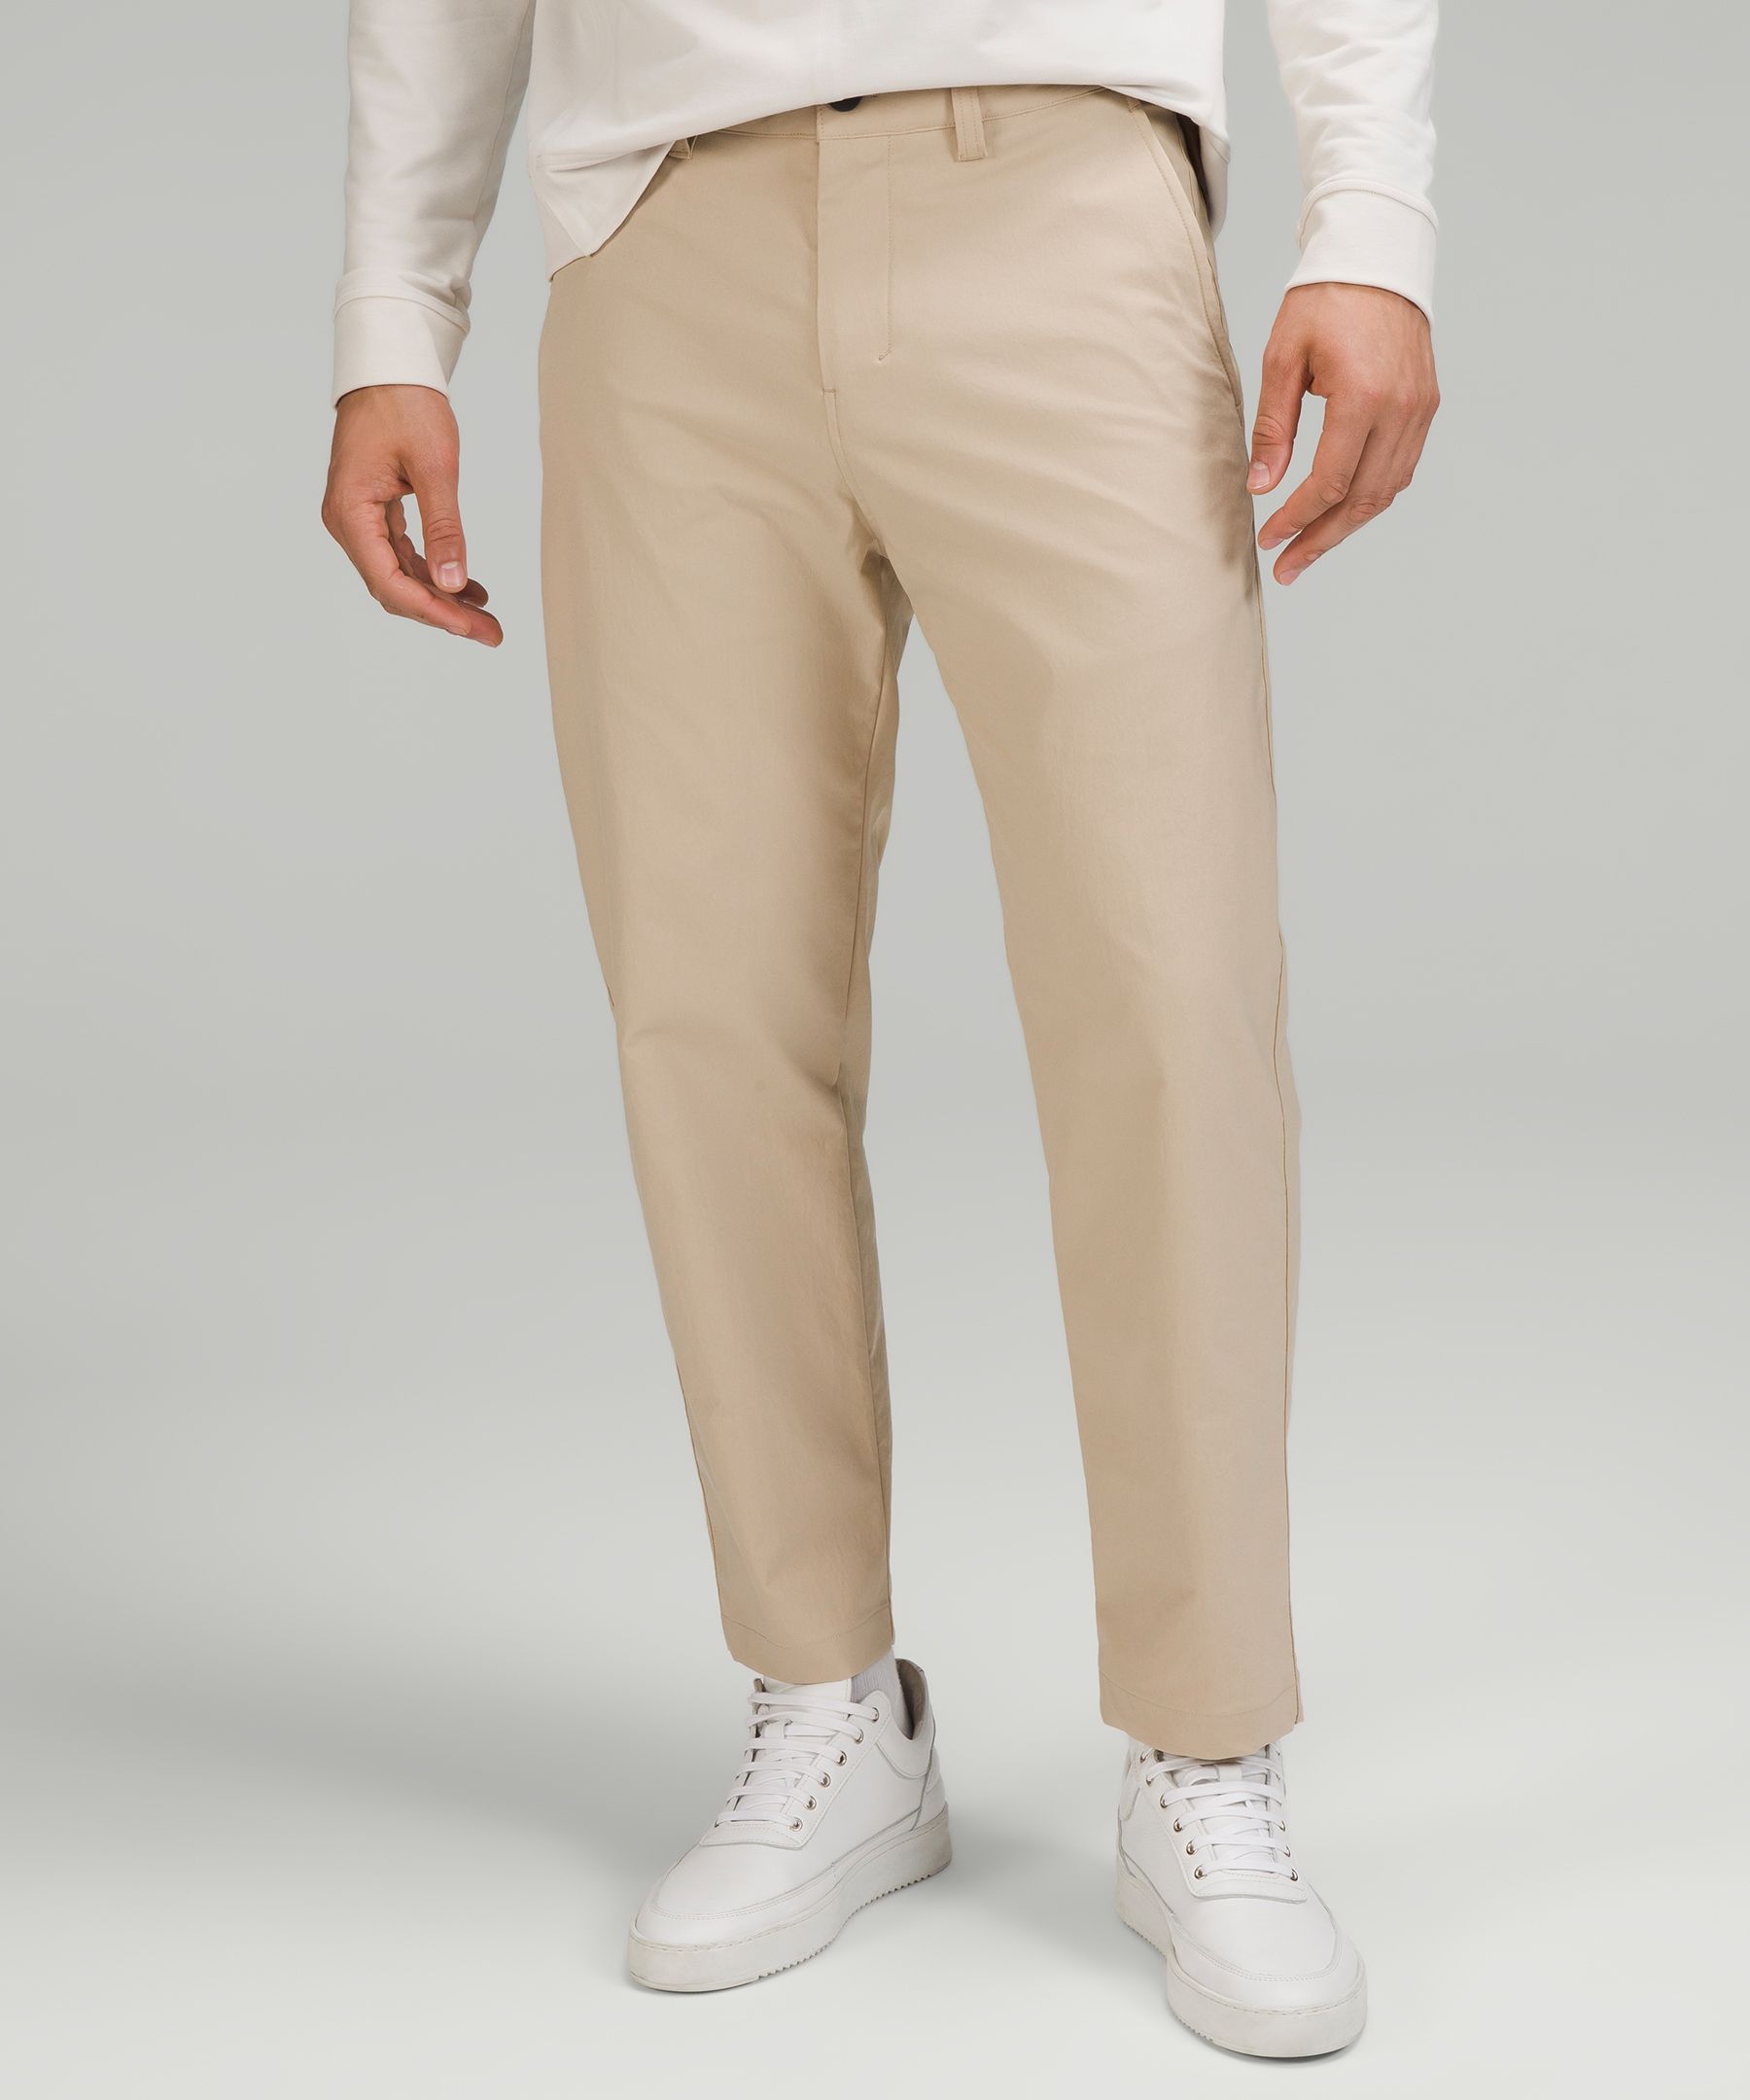 Relaxed Tapered Trouser, Men's Trousers